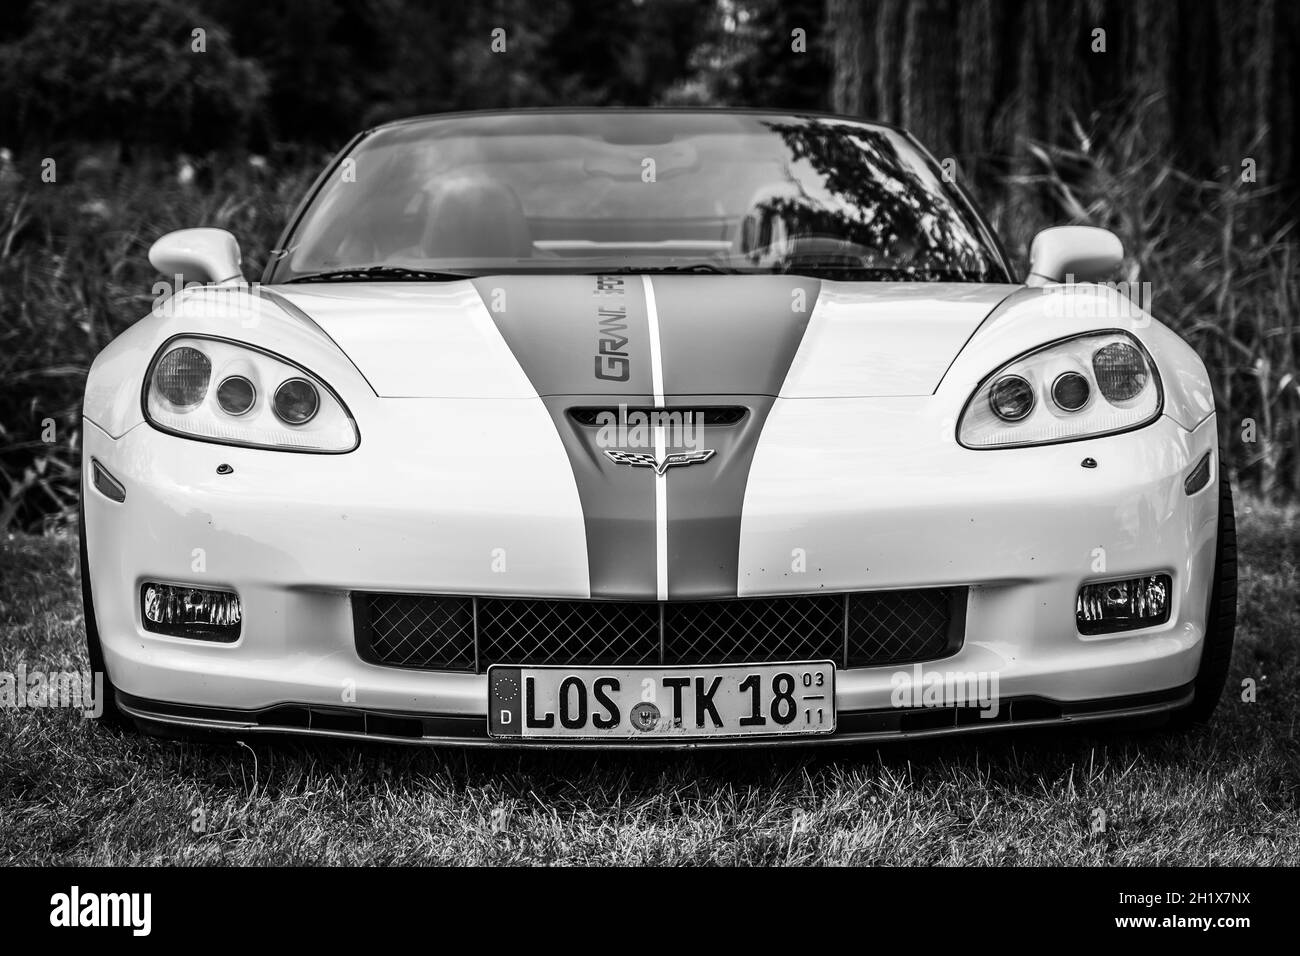 DIEDERSDORF, GERMANY - AUGUST 21, 2021: The sports car Chevrolet Corvette Grand Sport Convertible. Black and white. The exhibition of 'US Car Classics Stock Photo